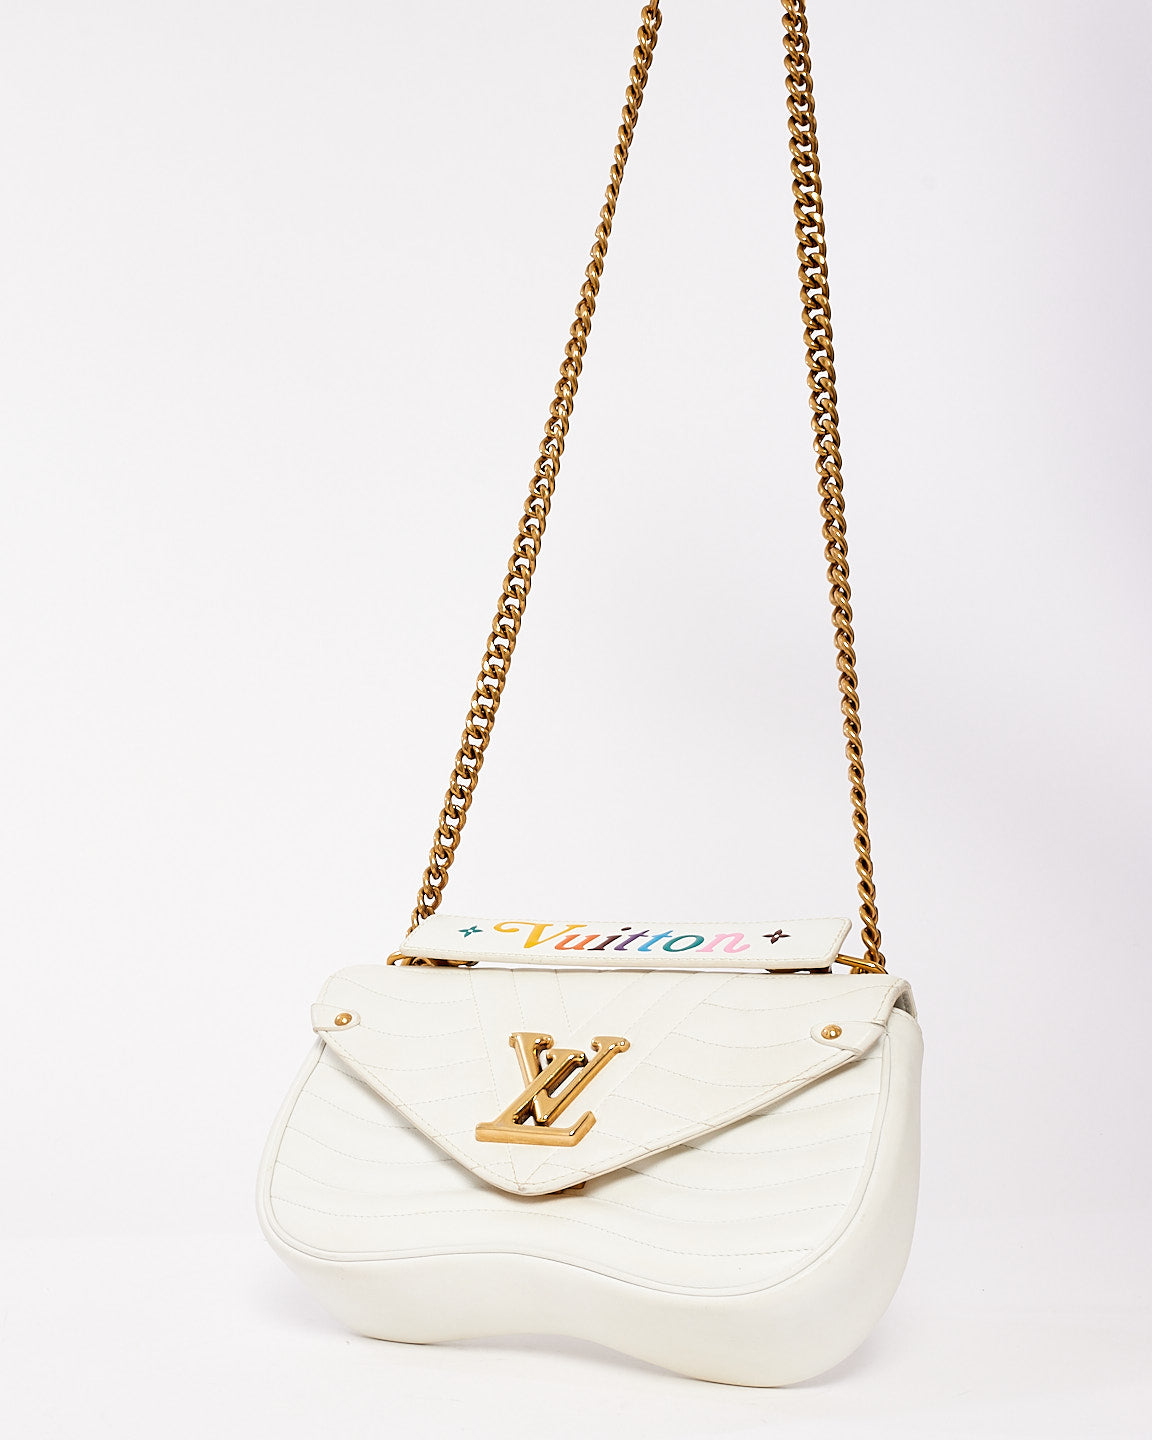 Louis Vuitton White Leather New Wave Chain PM